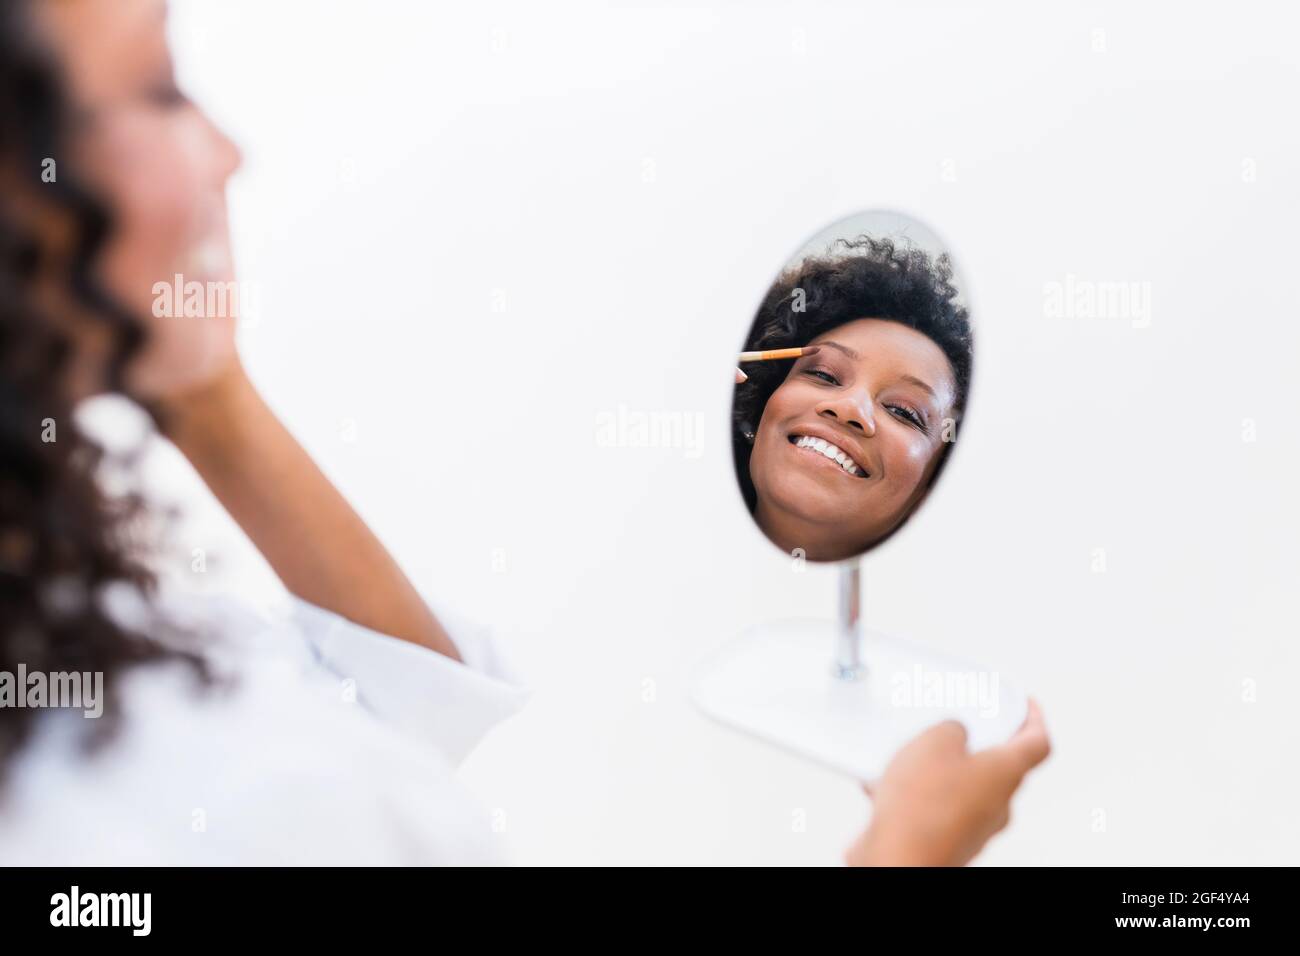 Woman applying eyeshadow while looking at mirror reflection Stock Photo